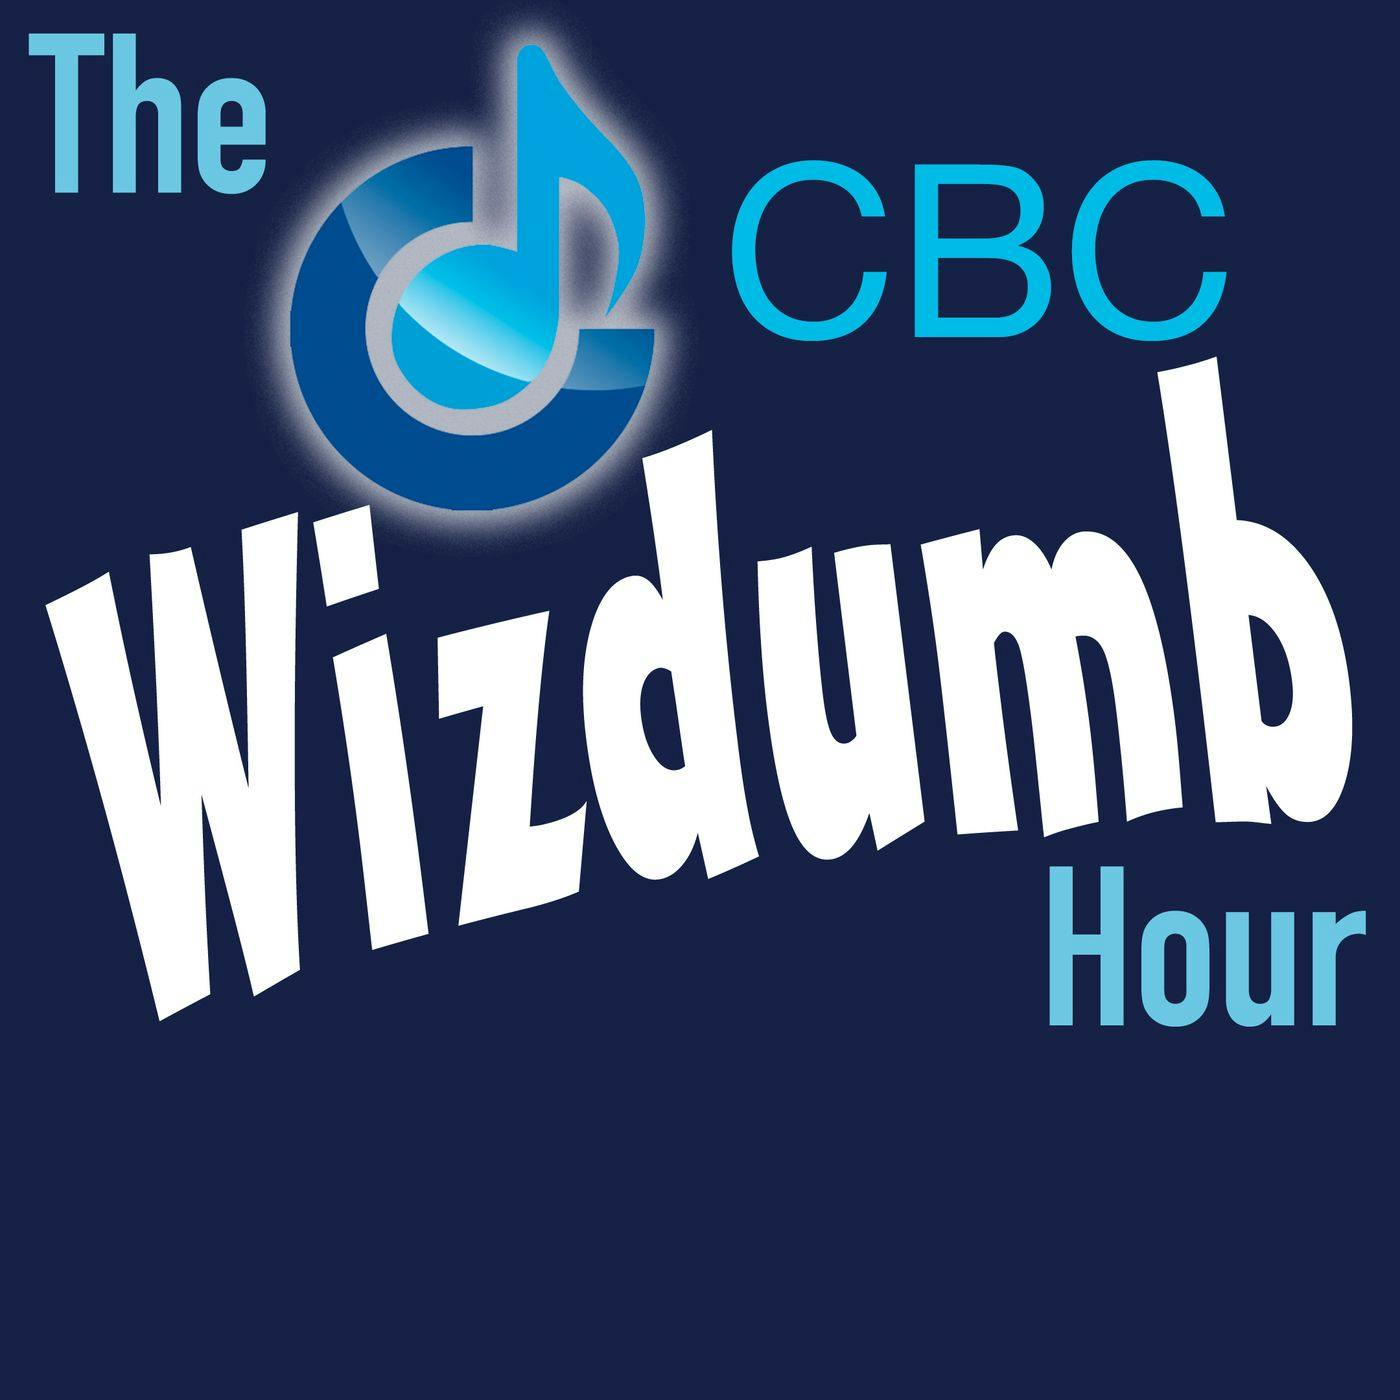 The CBC Wizdumb Hour #128 - Special Guest Mike Shulte of The Pork Tornadoes